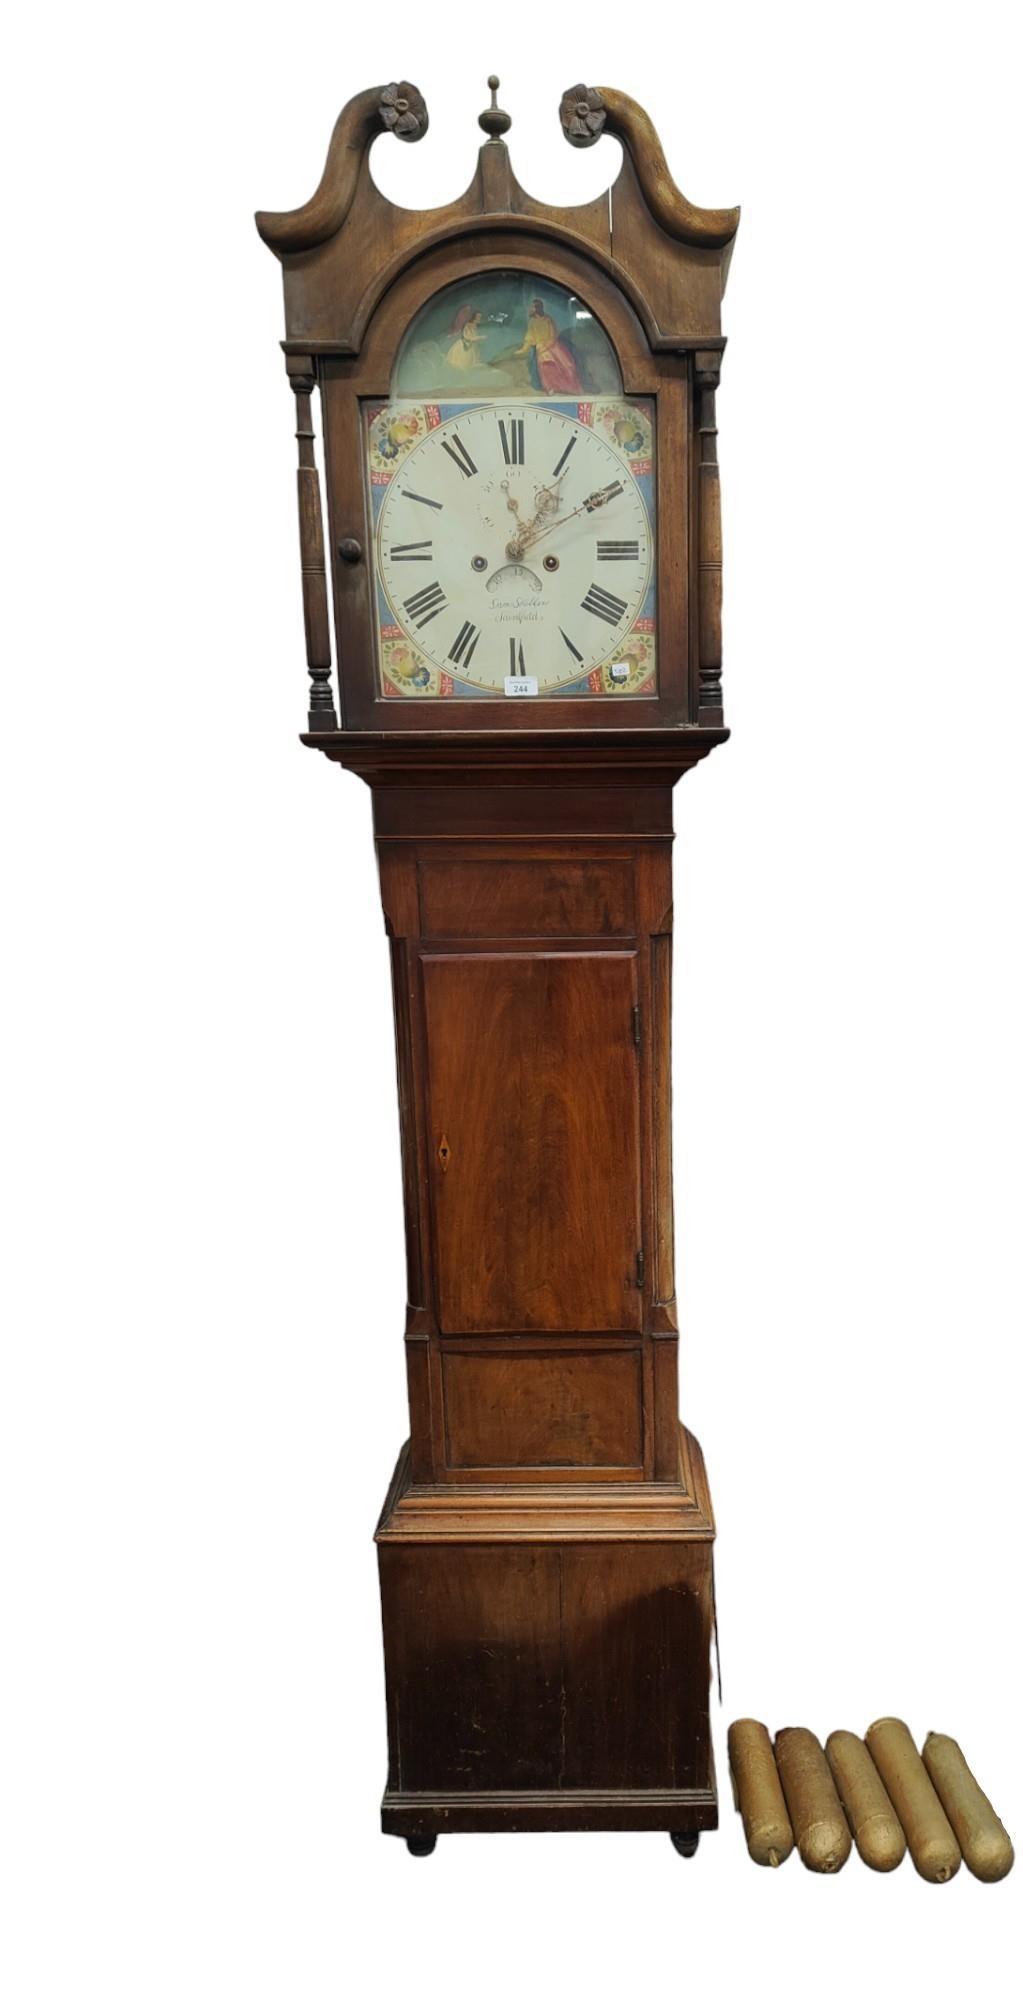 ANTIQUE MAHOGANY LONG CASED CLOCK WITH PAINTED DIAL - SKILLEN SAINTFIELD